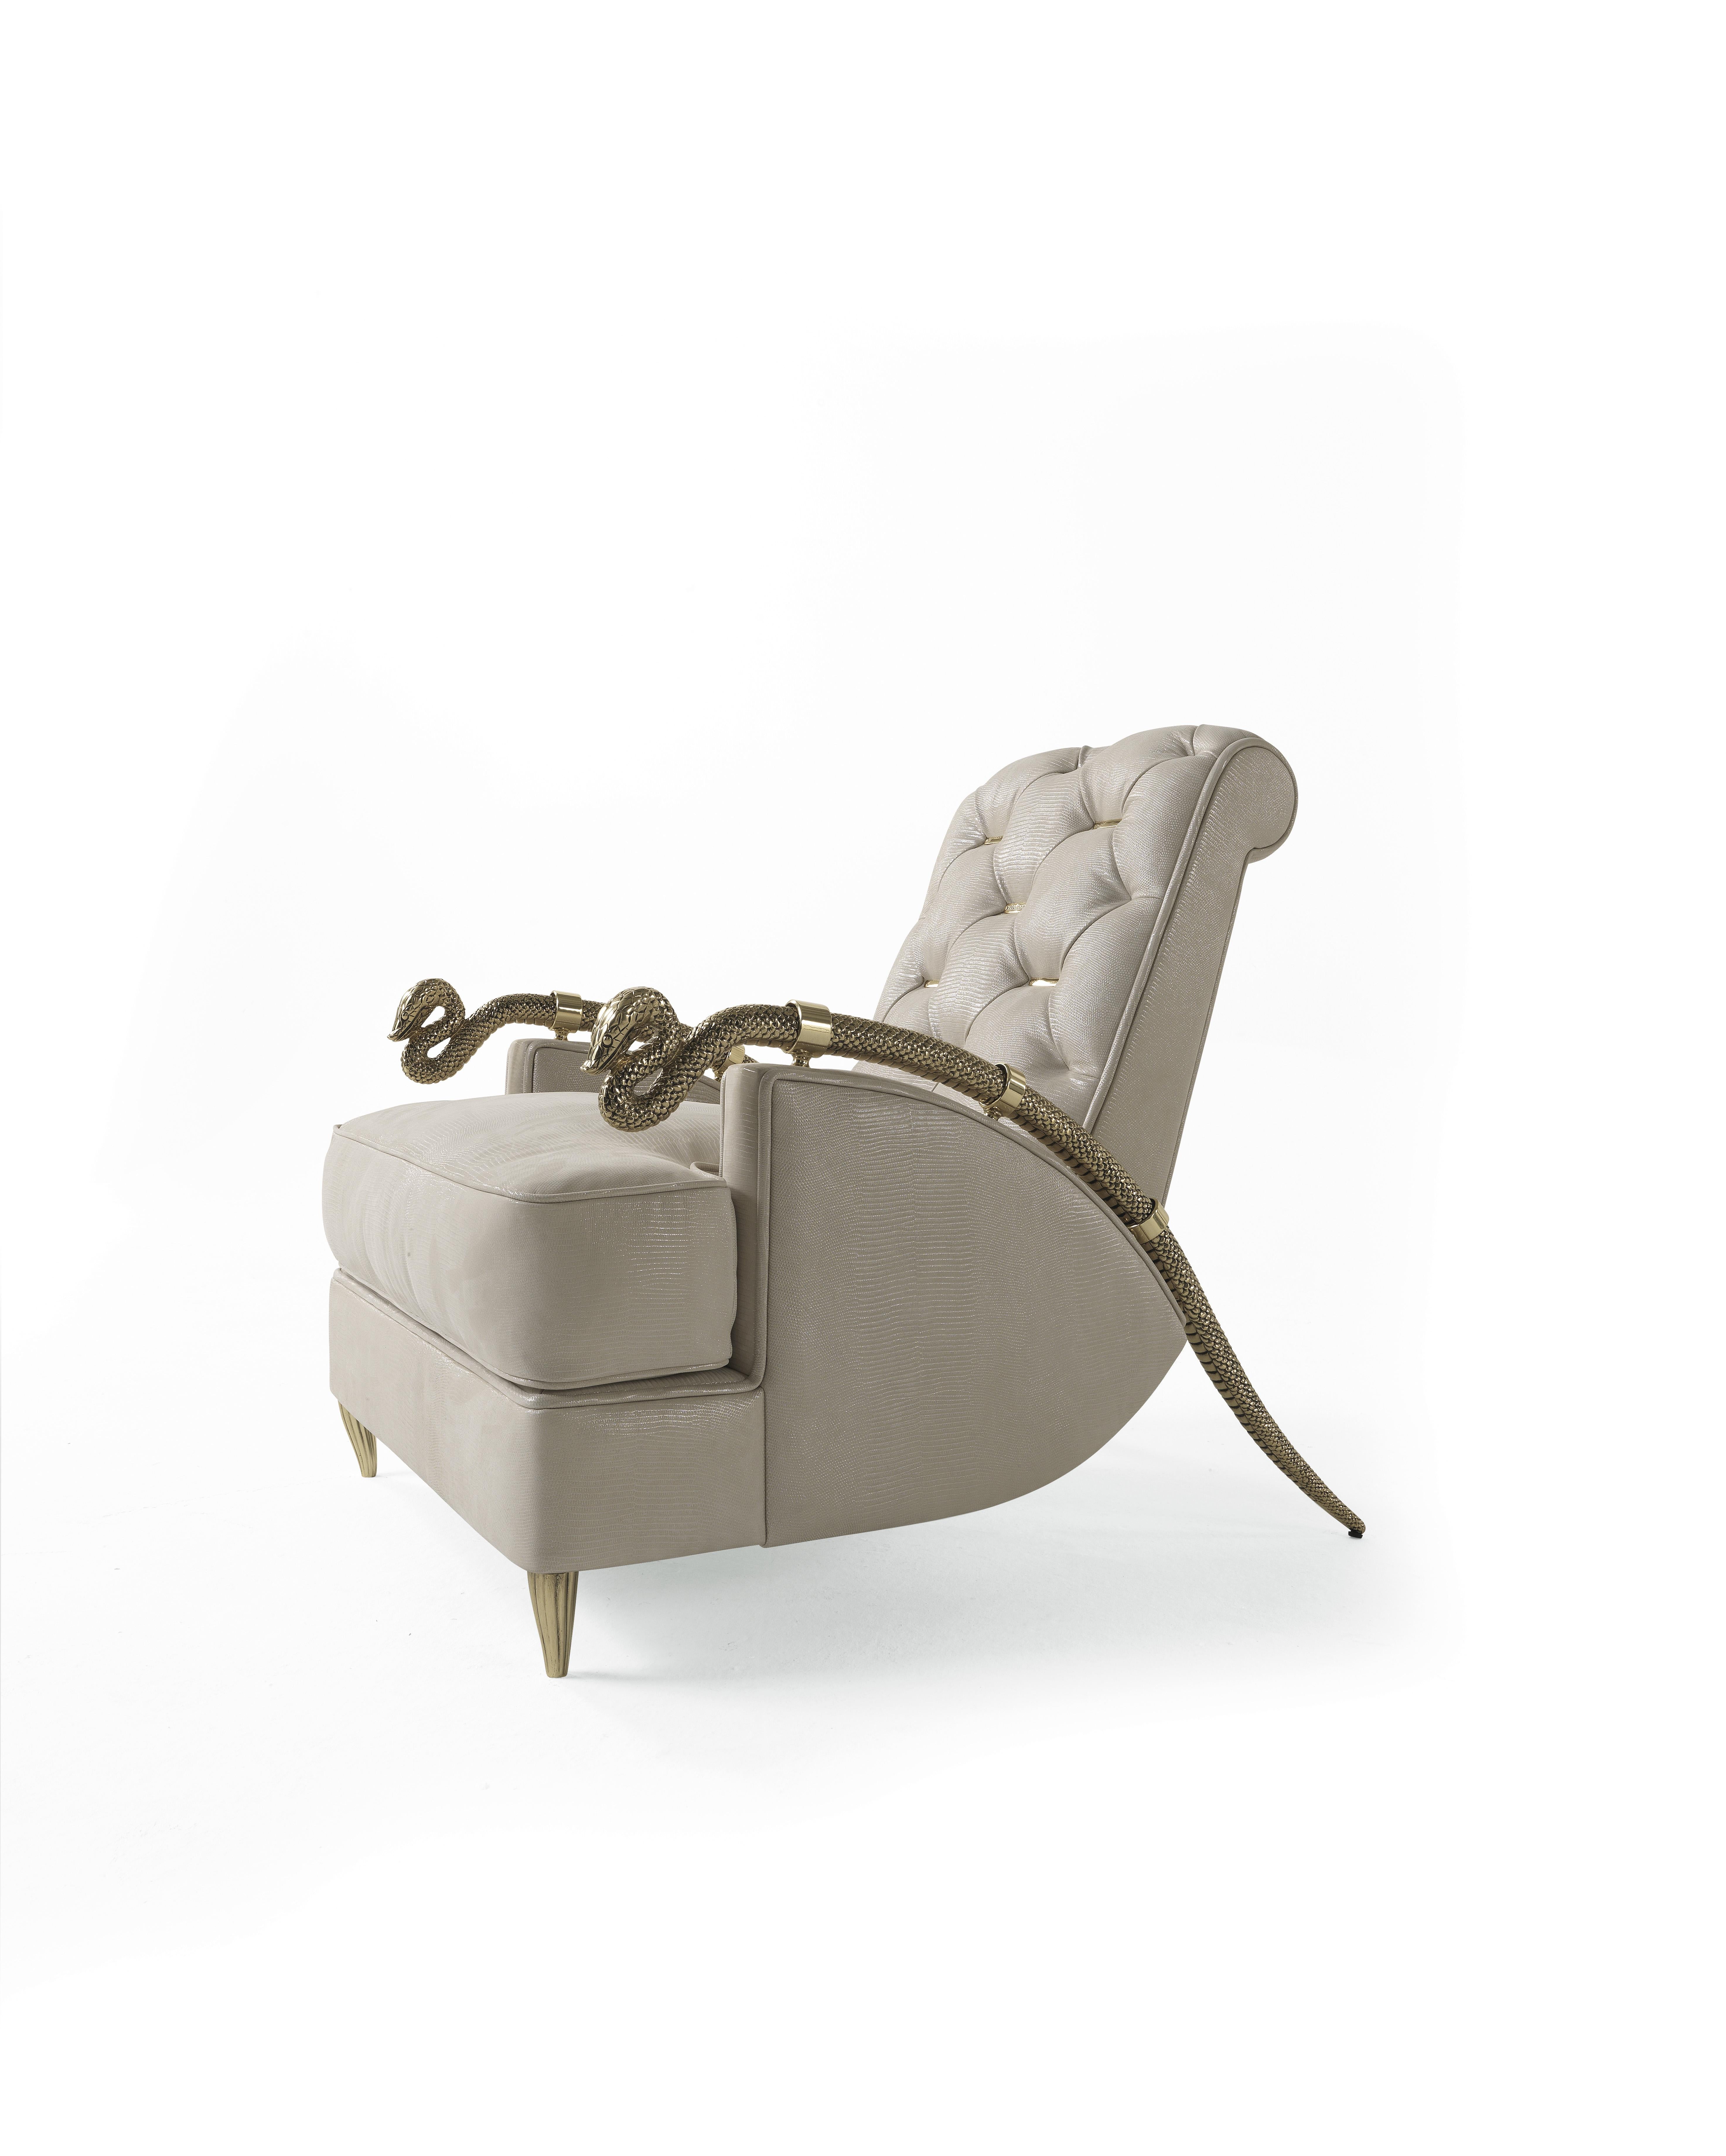 Modern 21st Century Snake Armchair in Leather by Roberto Cavalli Home Interiors For Sale